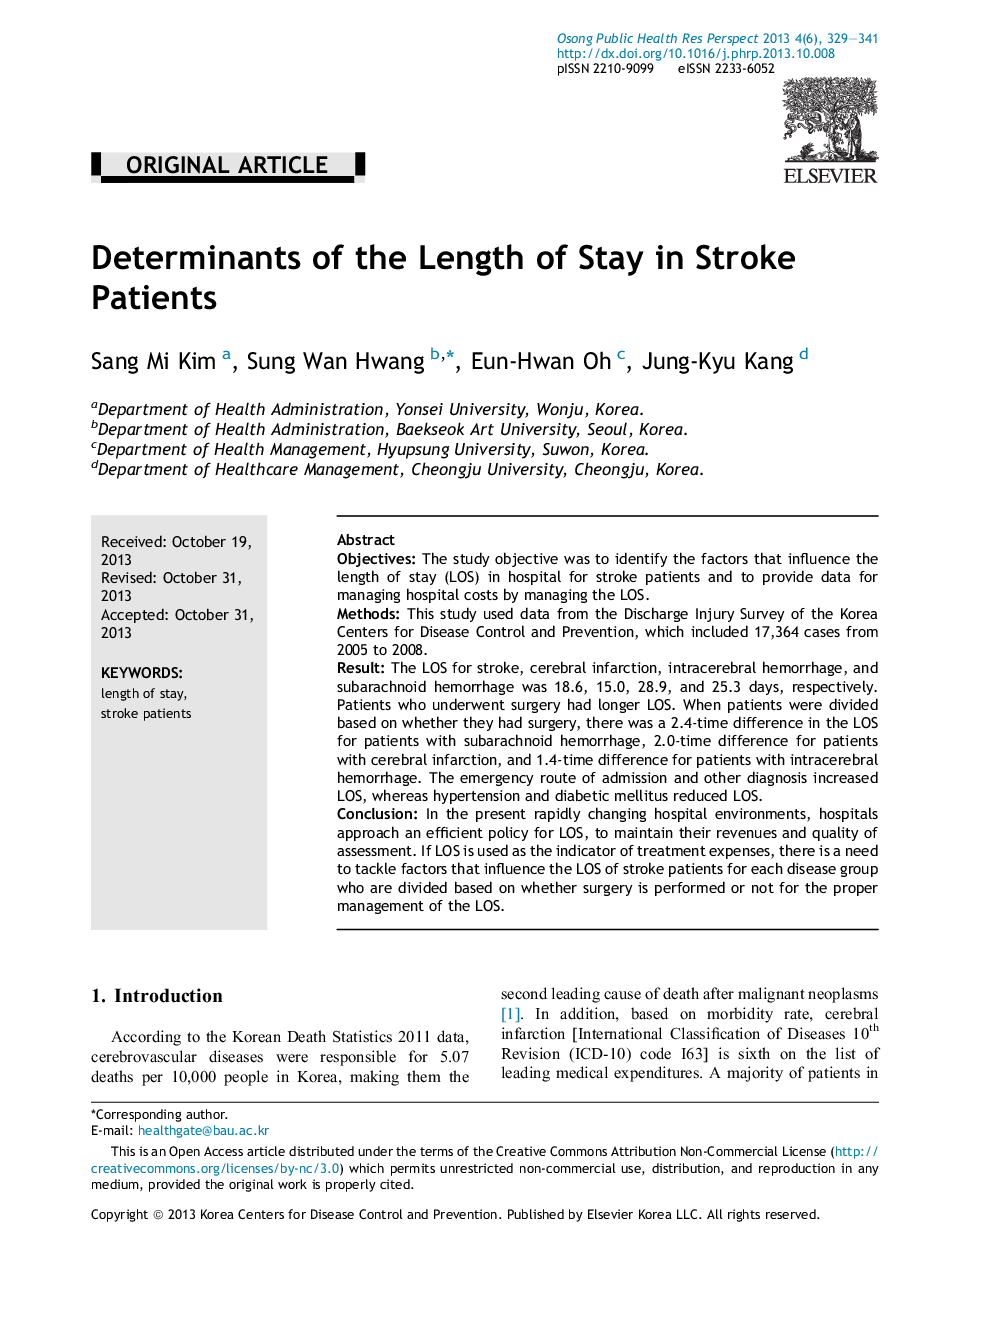 Determinants of the Length of Stay in Stroke Patients 